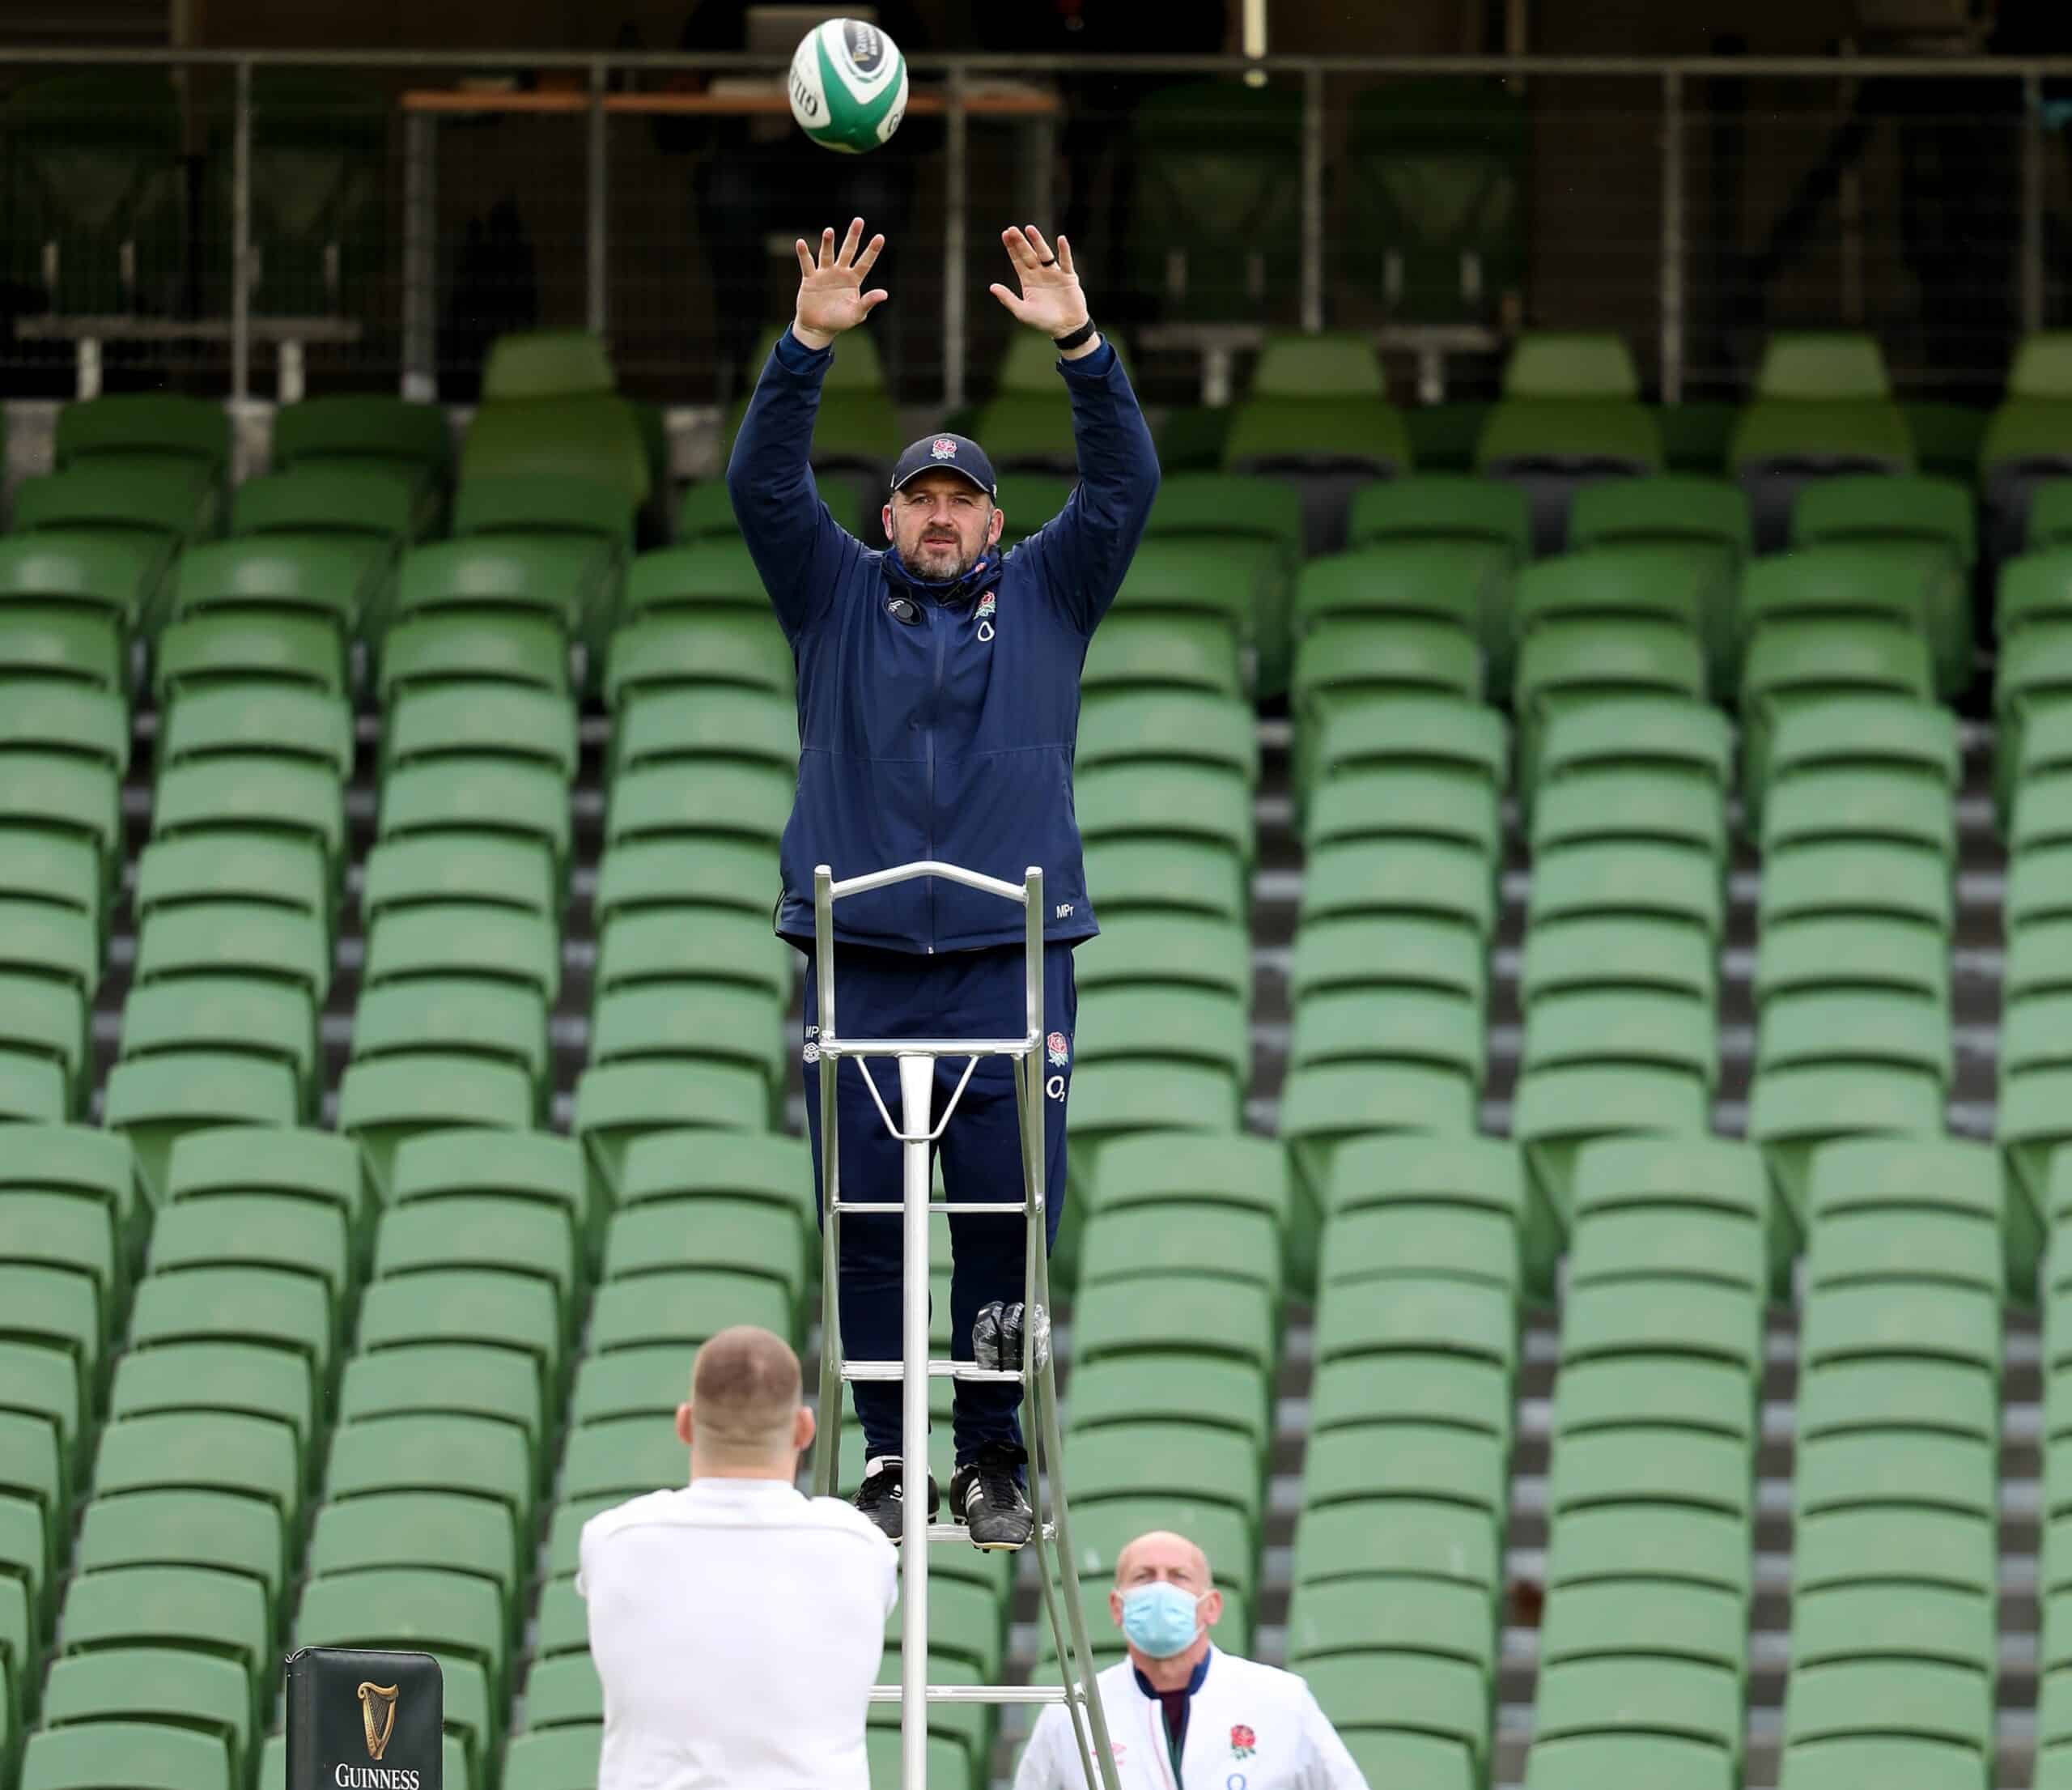 England Rugby practising line-outs with a Henchman tripod ladder